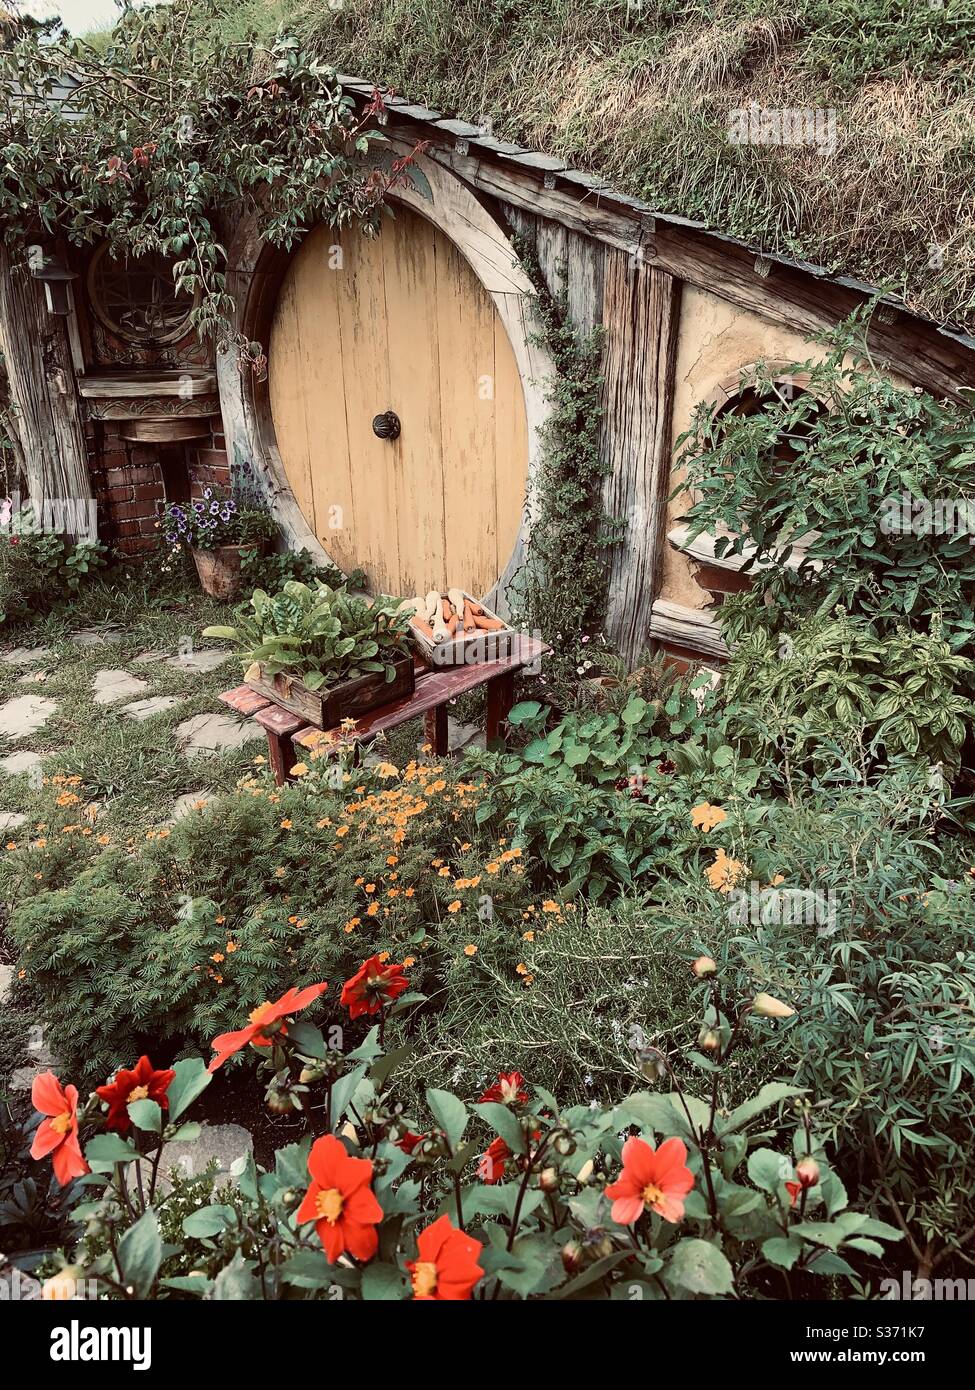 Hobbiton. Bucolic place in New Zealand where the hobbits from the Middle Earth live. Lord of the rings movie set. Yellow wooden door Stock Photo